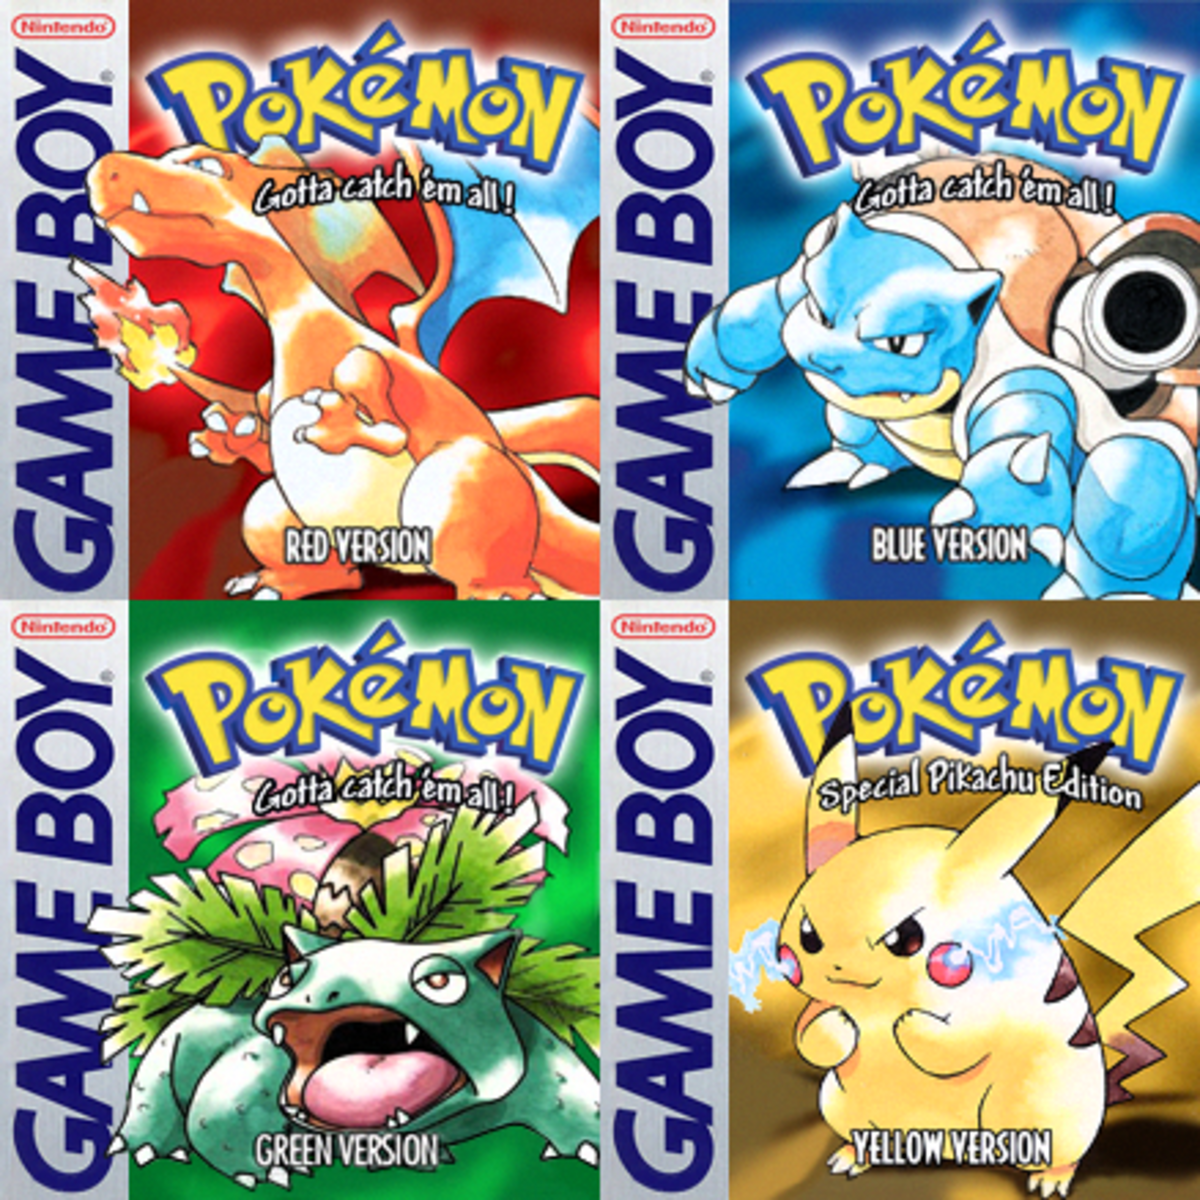 Pokemon Generation 1 - Gameplay And Review